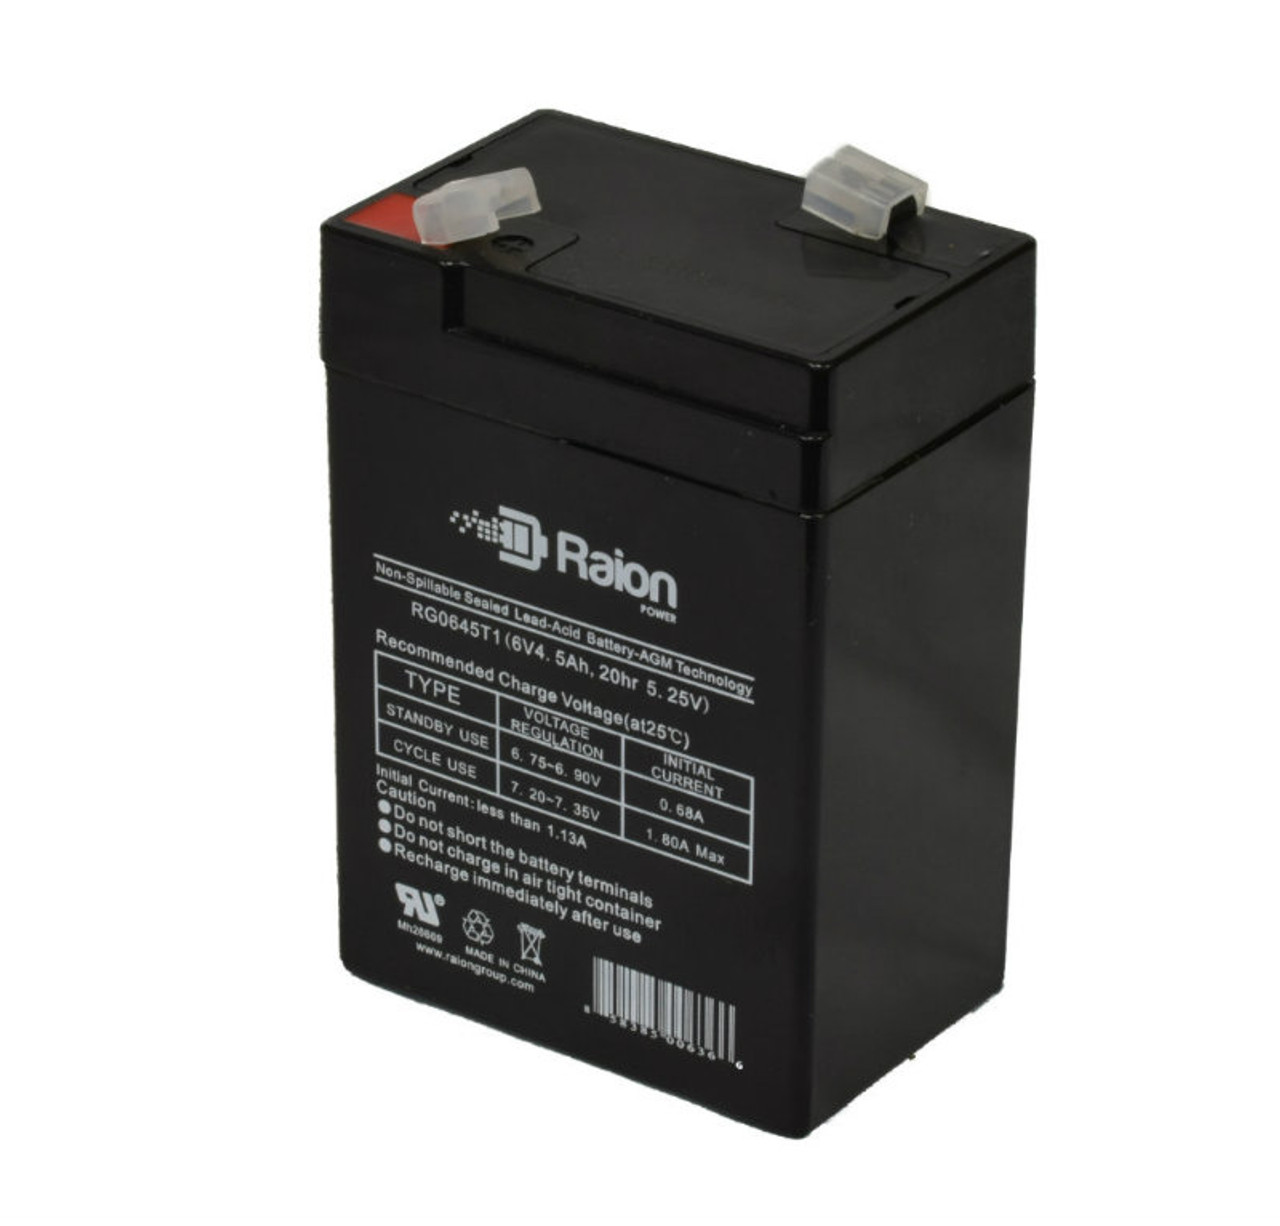 Raion Power RG0645T1 6V 4.5Ah Replacement Battery Cartridge for Expocell P206/40